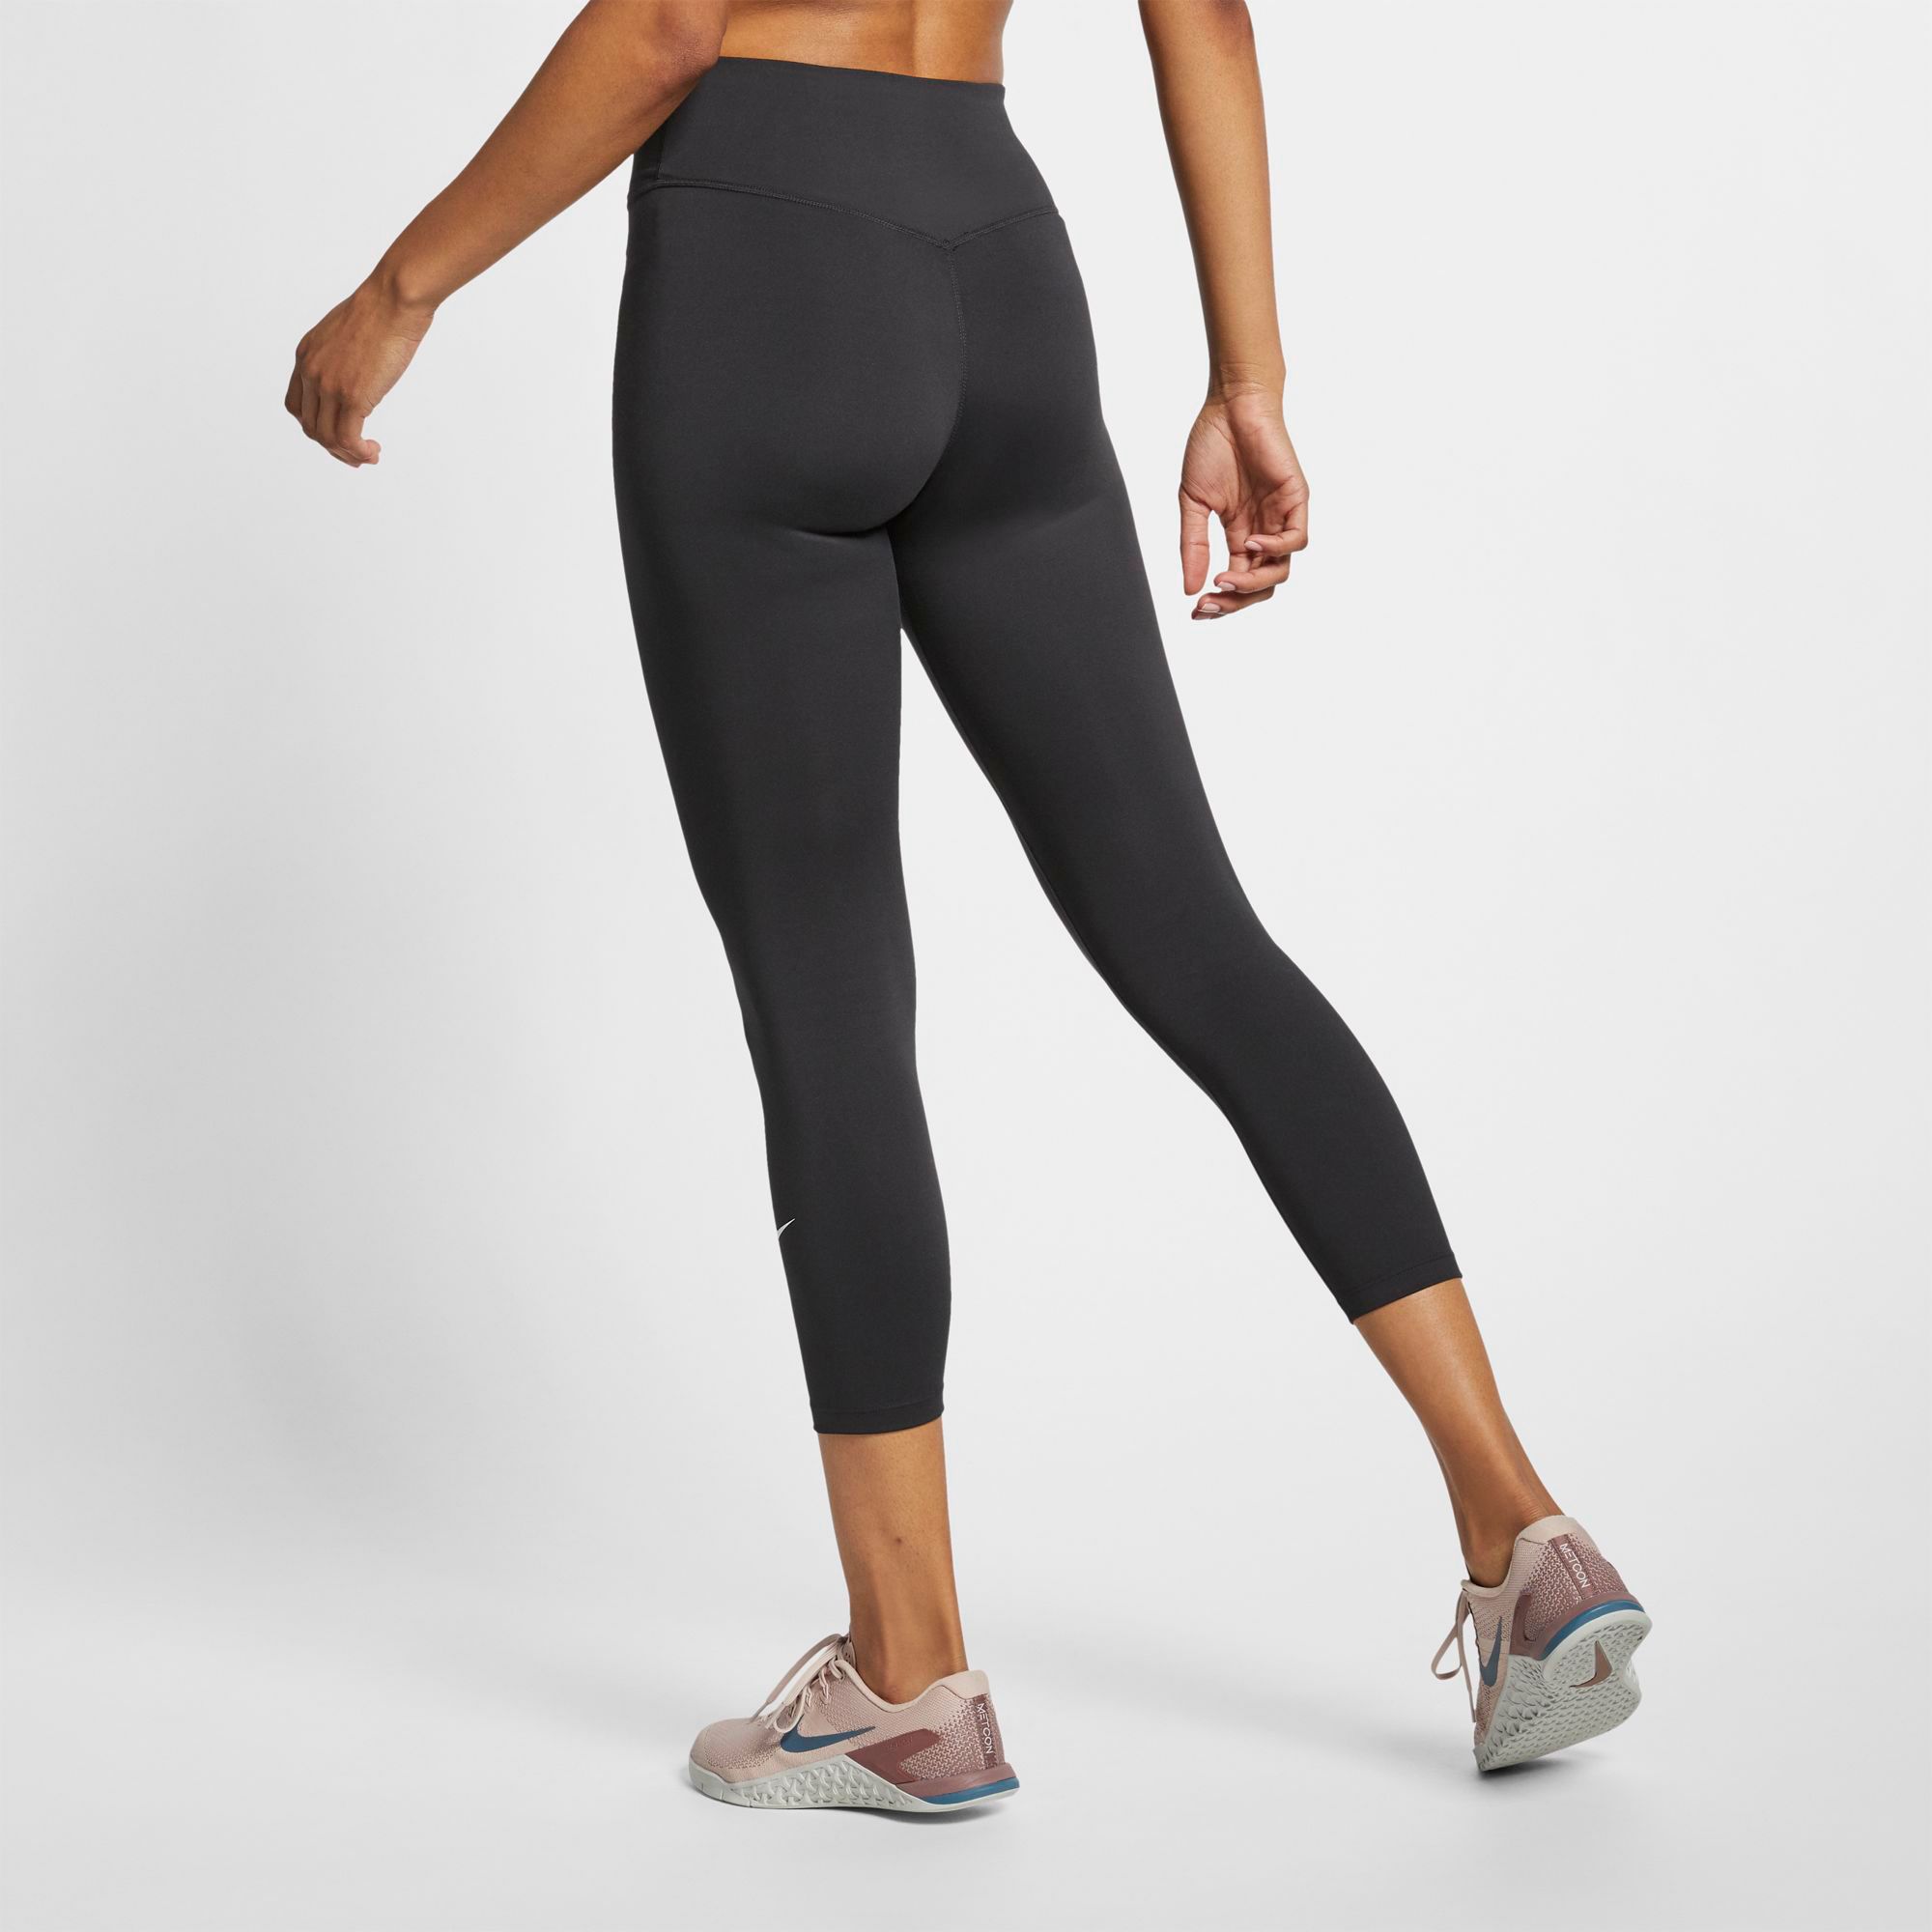 Dick's Sporting Goods Nike One Women's Training Crop Tights